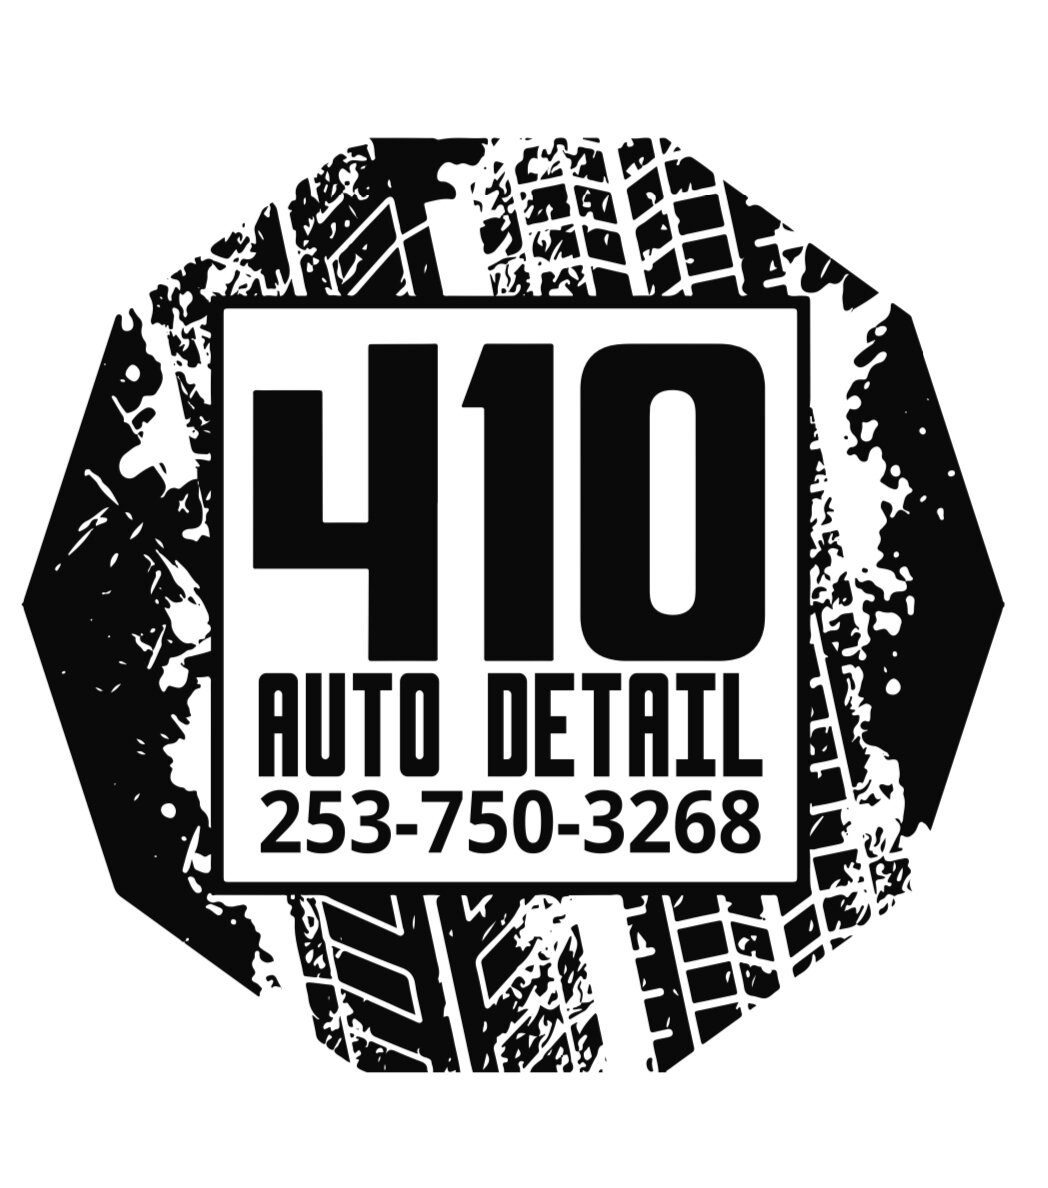 About — 410 AUTO DETAIL